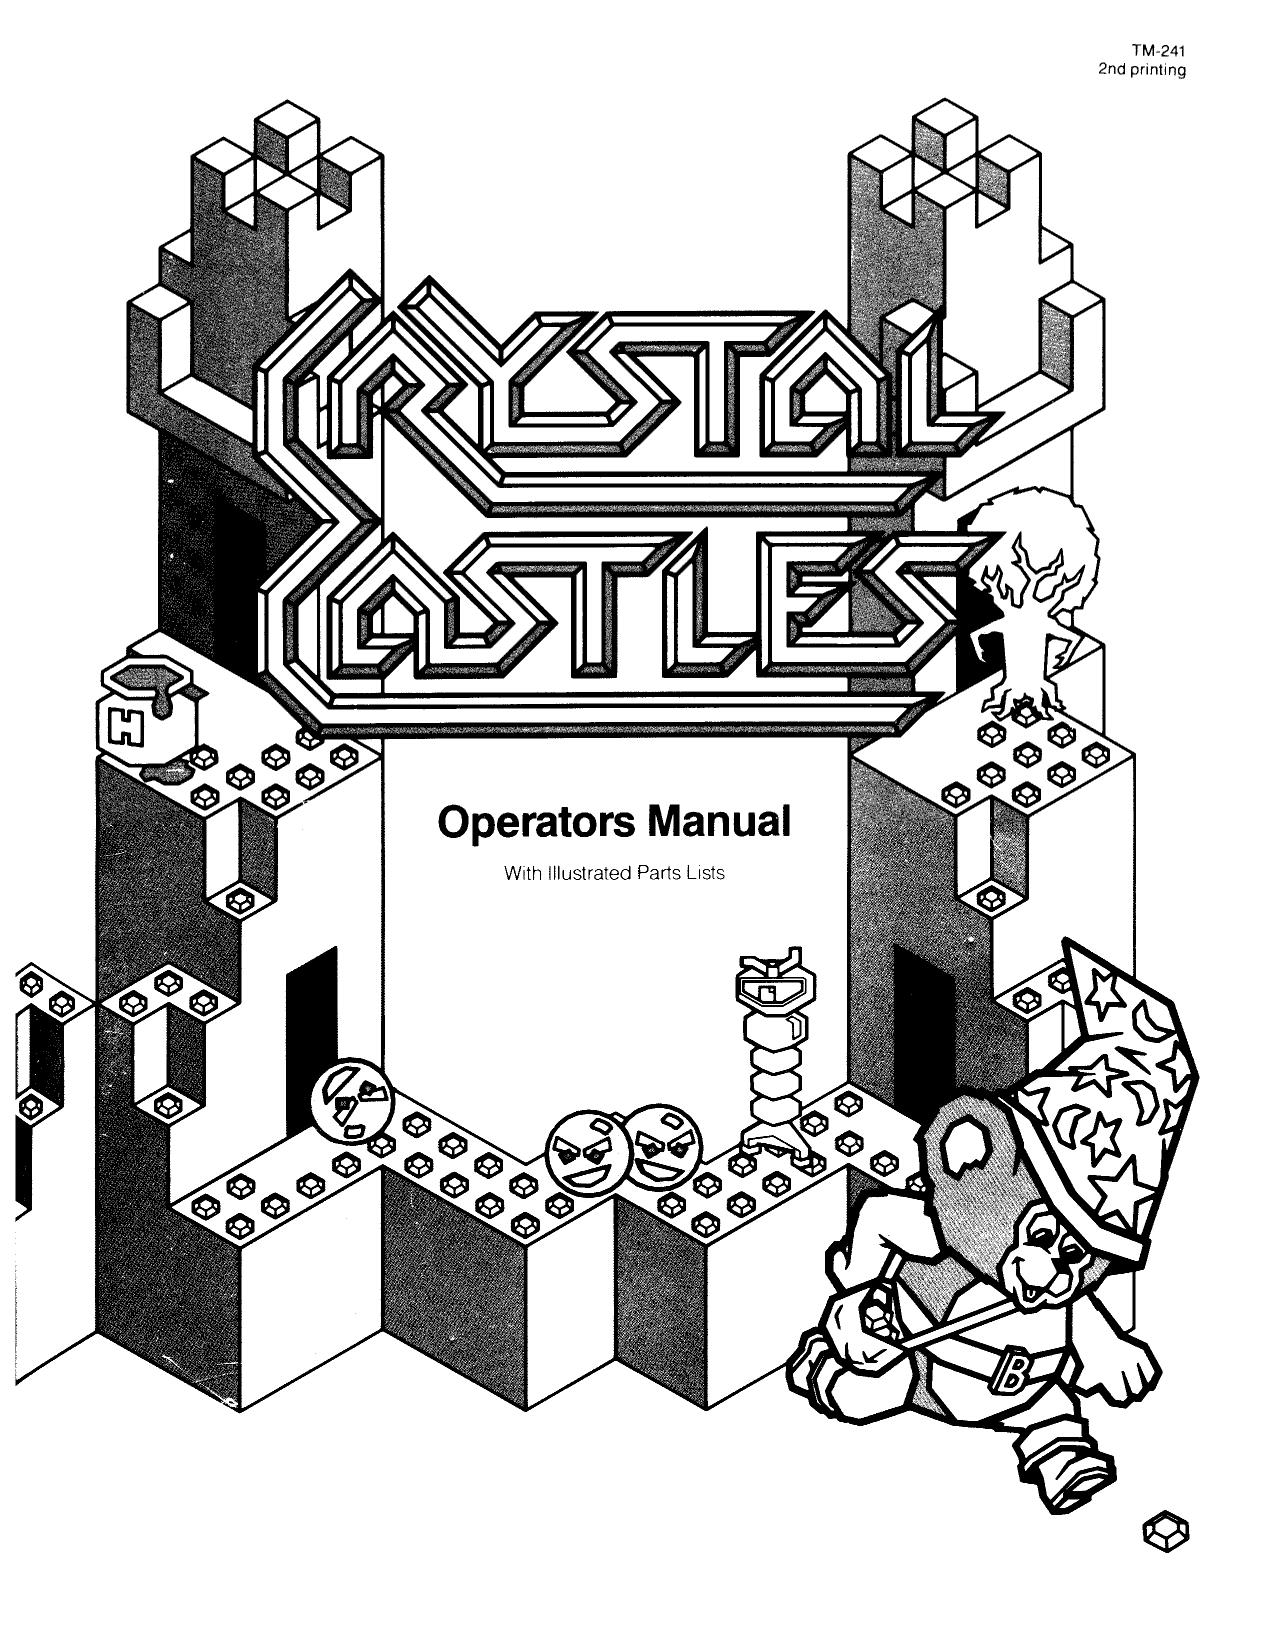 Space Invaders Cocktail B&W Parts Catalog (Taito 960015)